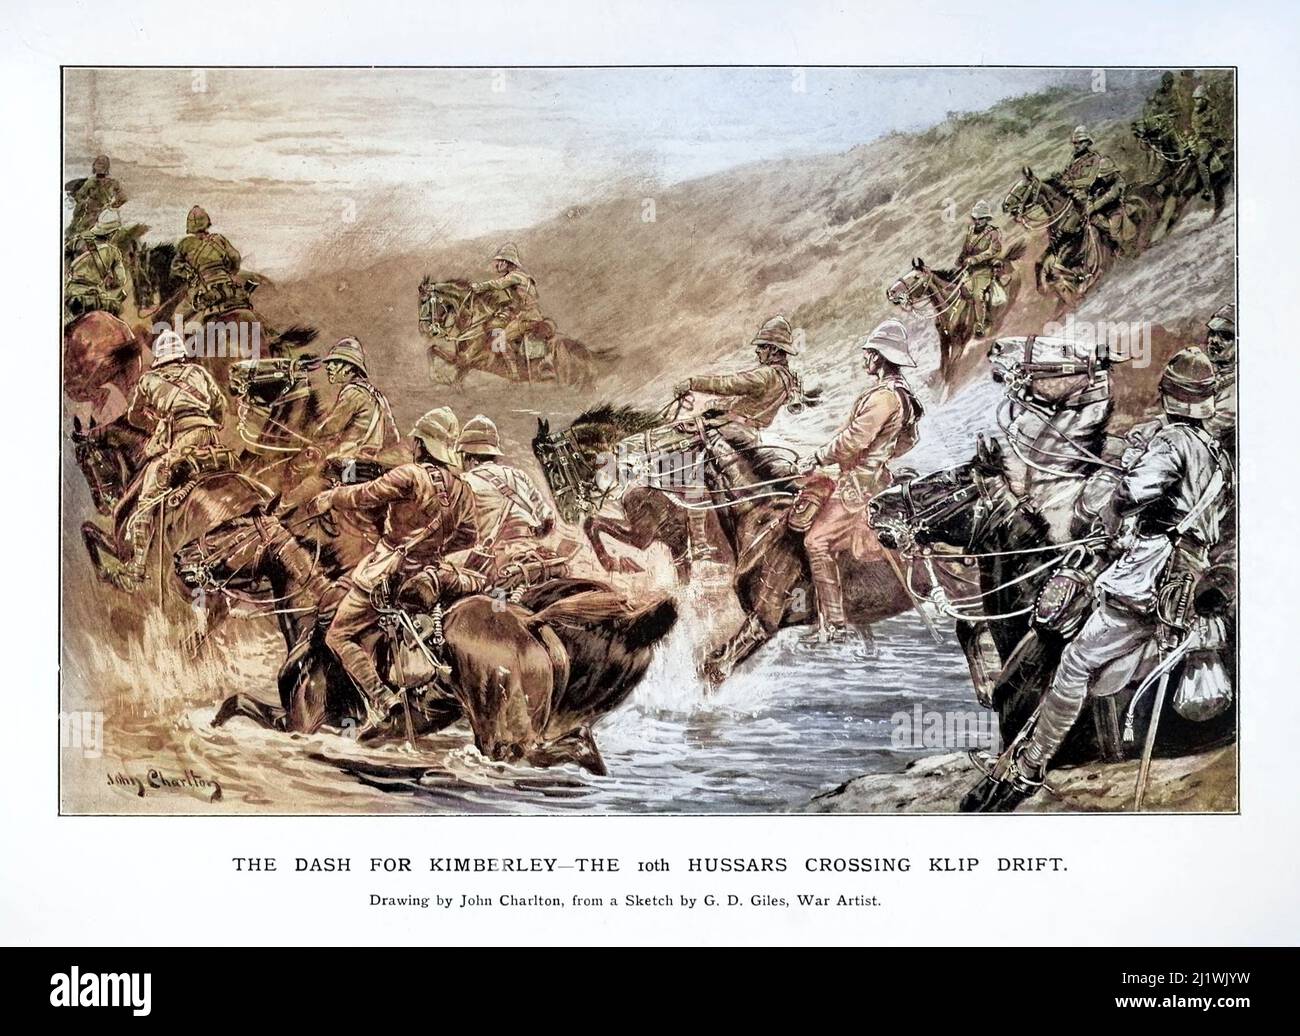 Machine coloured The Dash for Kimberley The 10th Hussars Crossing Klip Drift by John Charlton from the book ' South Africa and the Transvaal war ' by Stock Photo